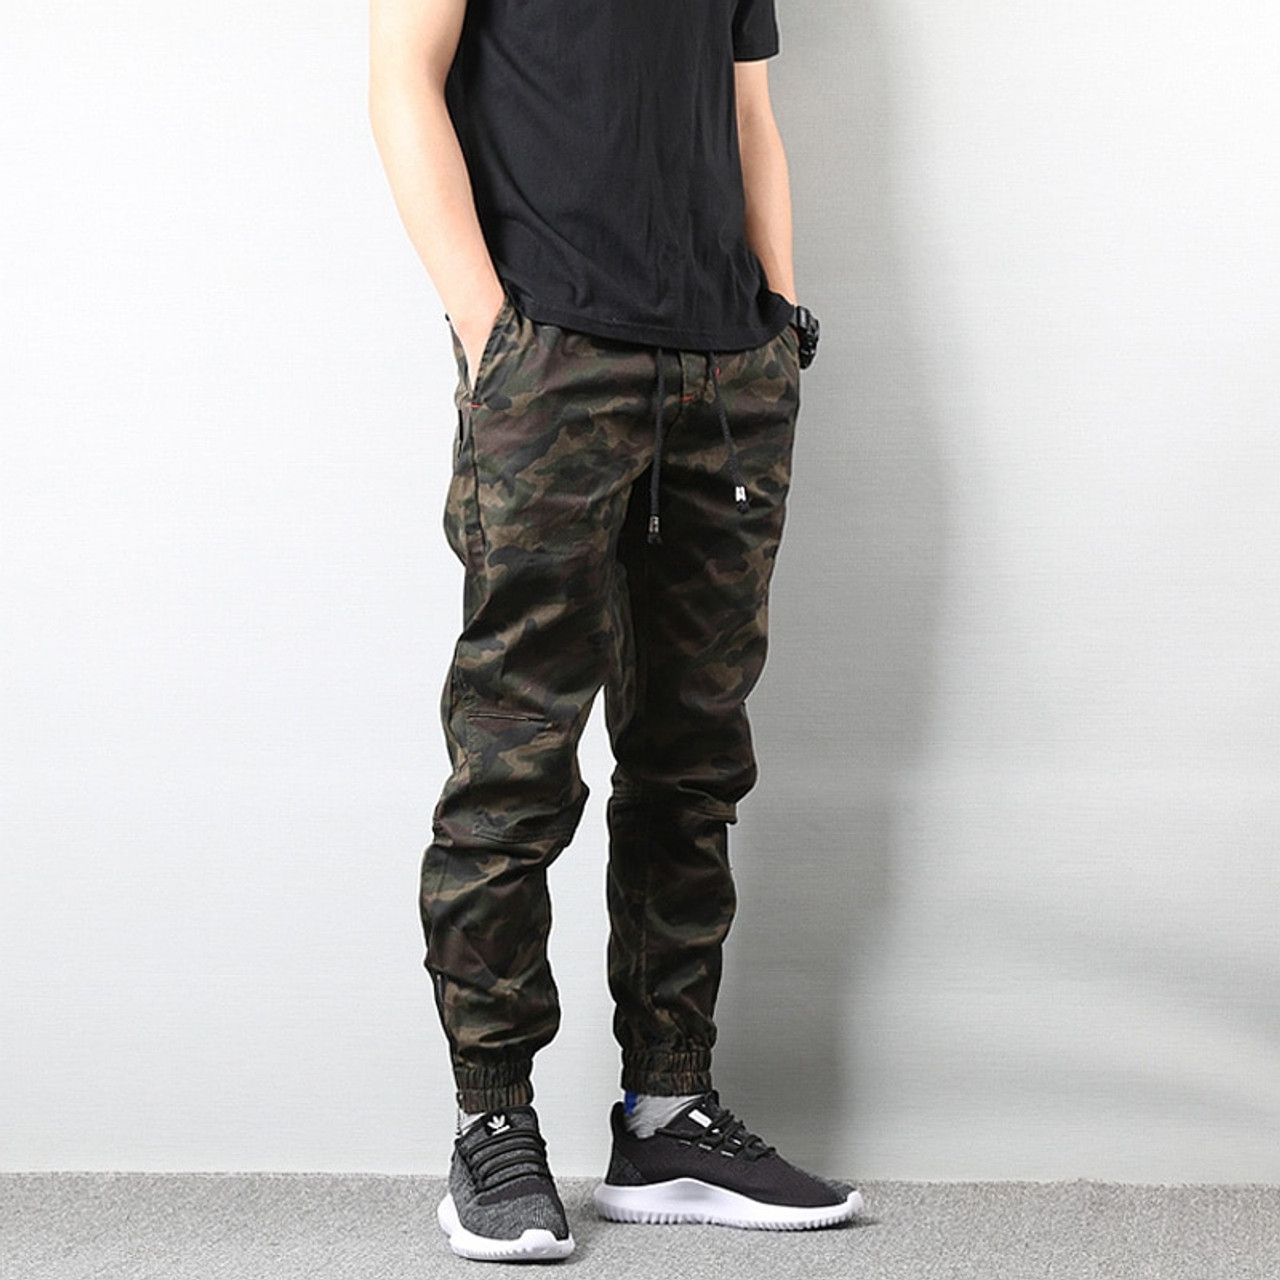 Stylish Cargo Pant for Boys | Army Print Pant for Kids | Joggers Cammando  Pants for